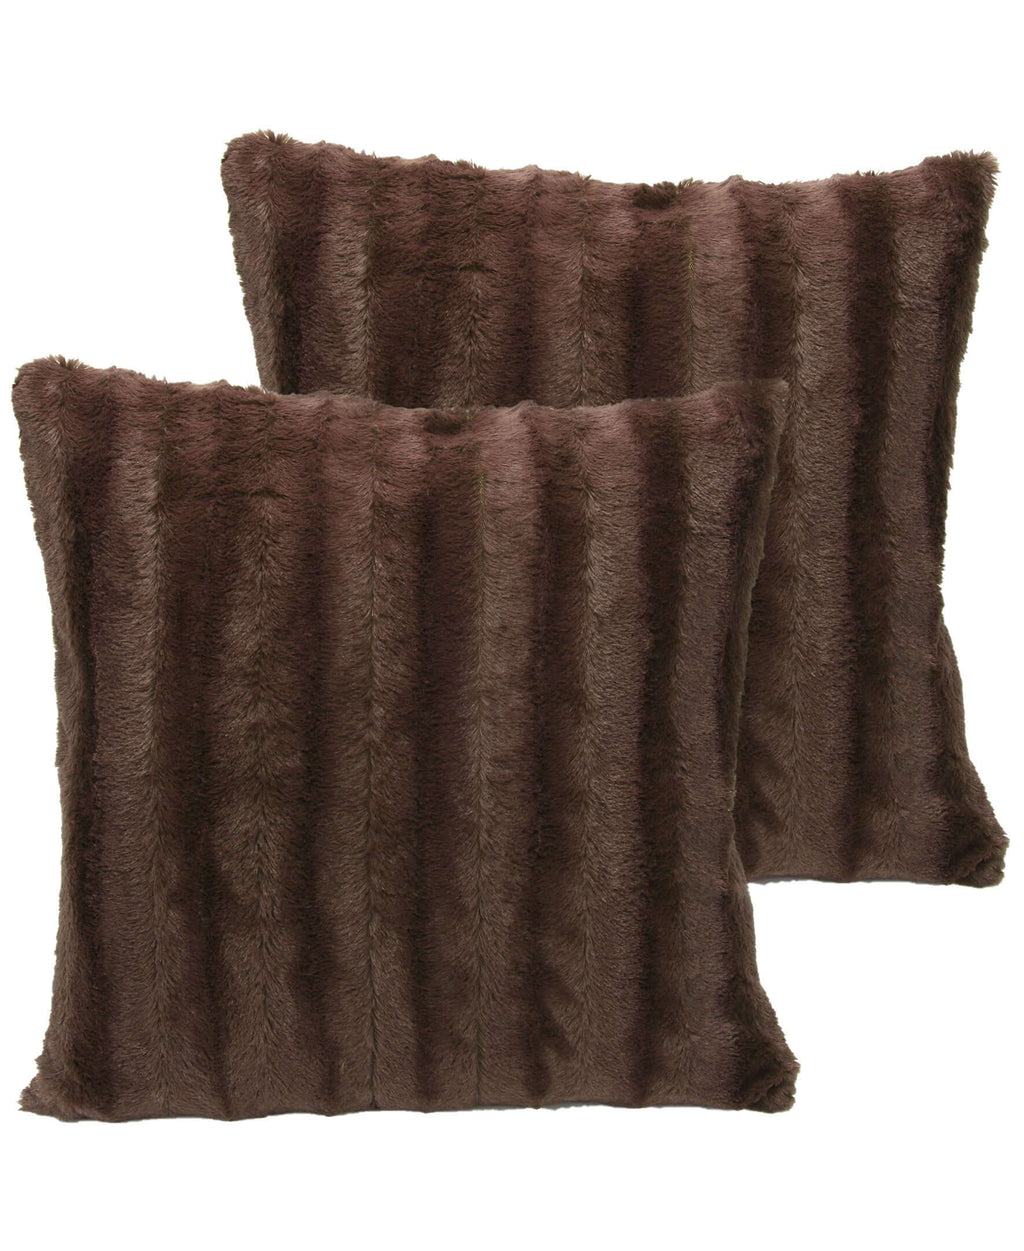 https://www.cheercollection.com/cdn/shop/products/cheer-collection-faux-fur-throw-pillows-set-of-2-decorative-couch-pillows-26-x-26-967025_1024x.jpg?v=1671780487